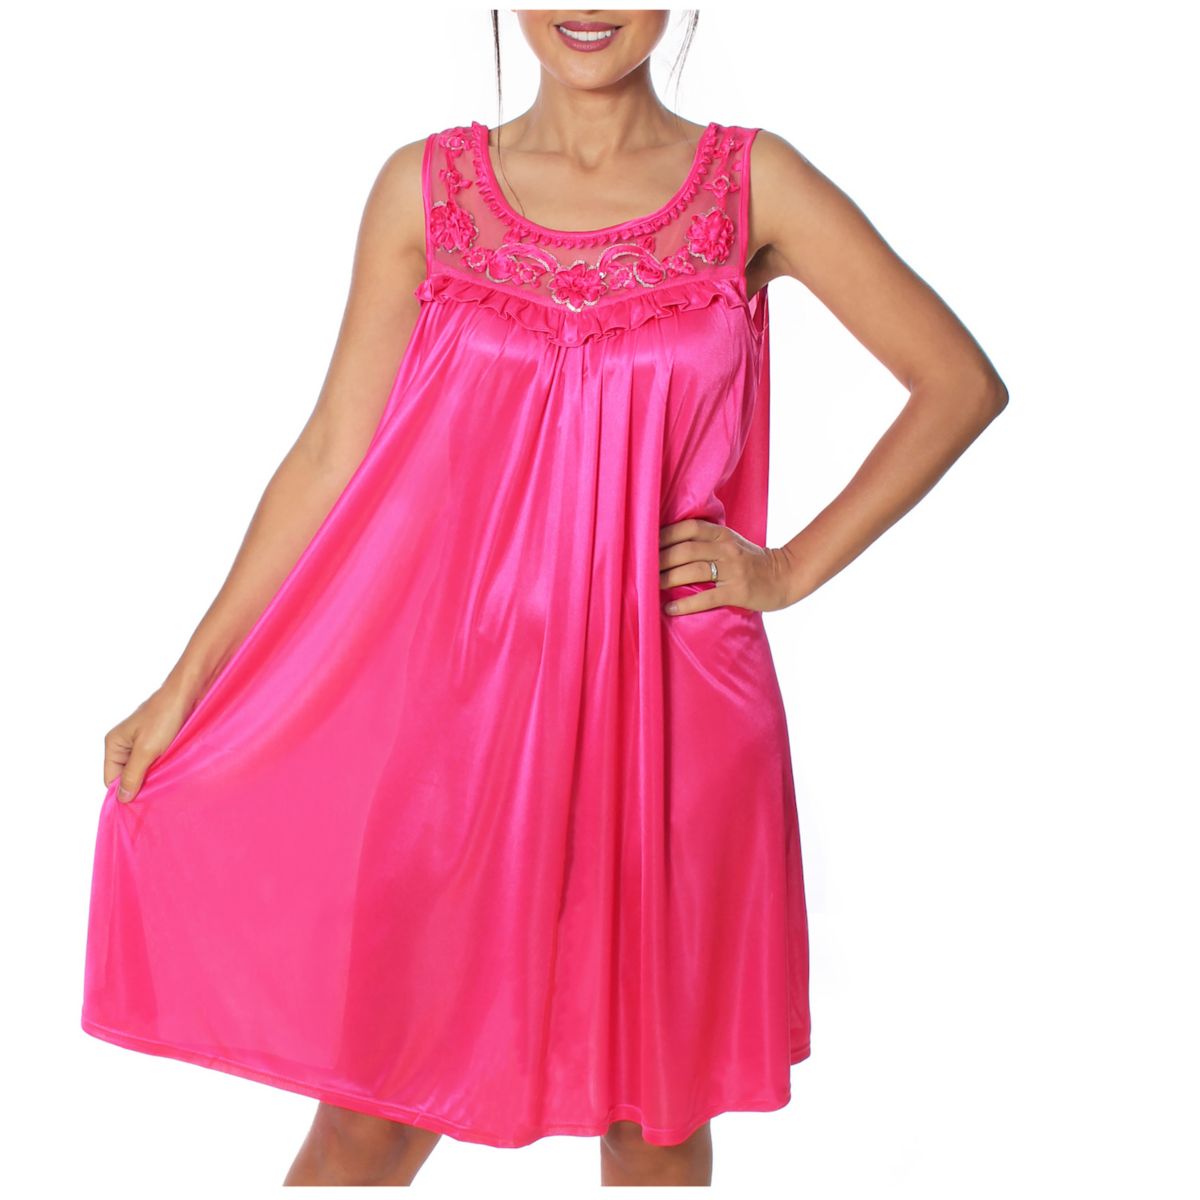 Women's Silky Feeling Sleeveless Nightgown With Sequins And Ribbon Roses Design Yafemarte